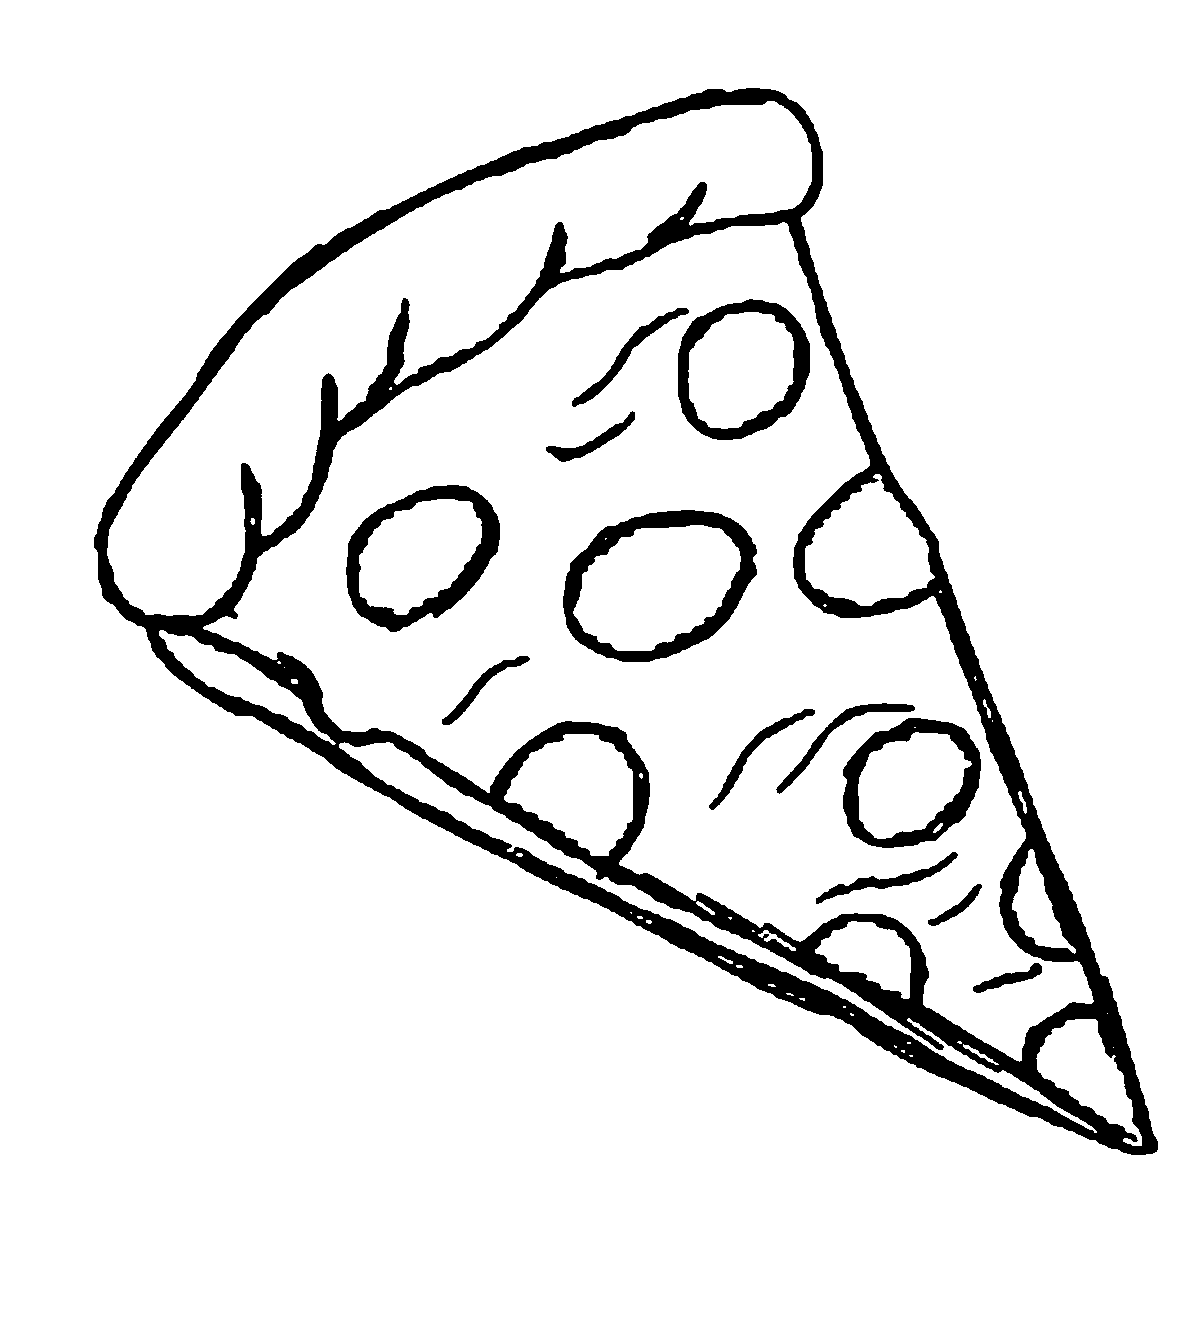 slice of pizza coloring pages Coloring4free